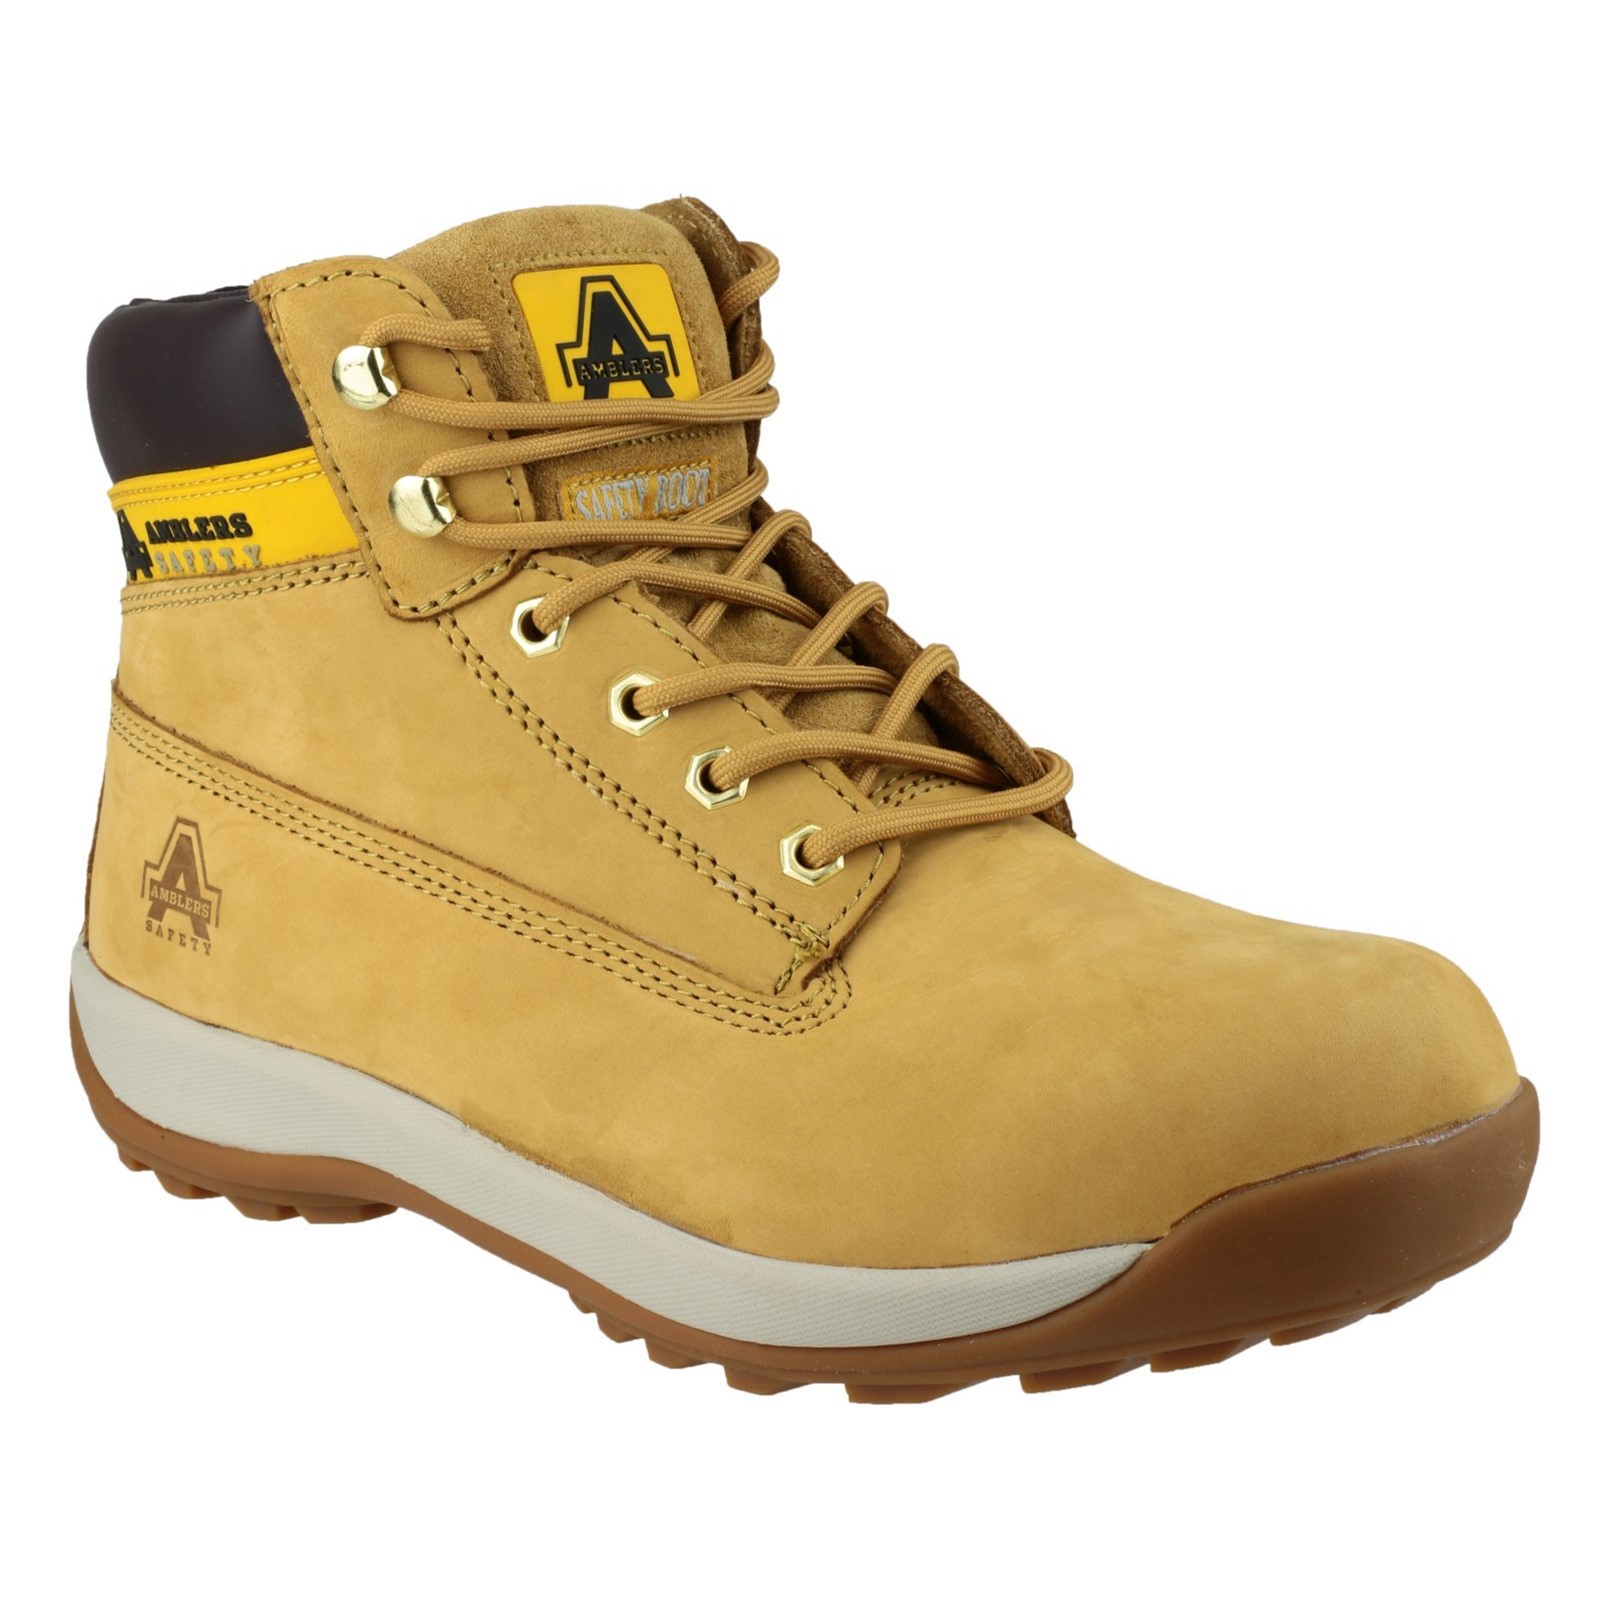 Amblers Safety Boots